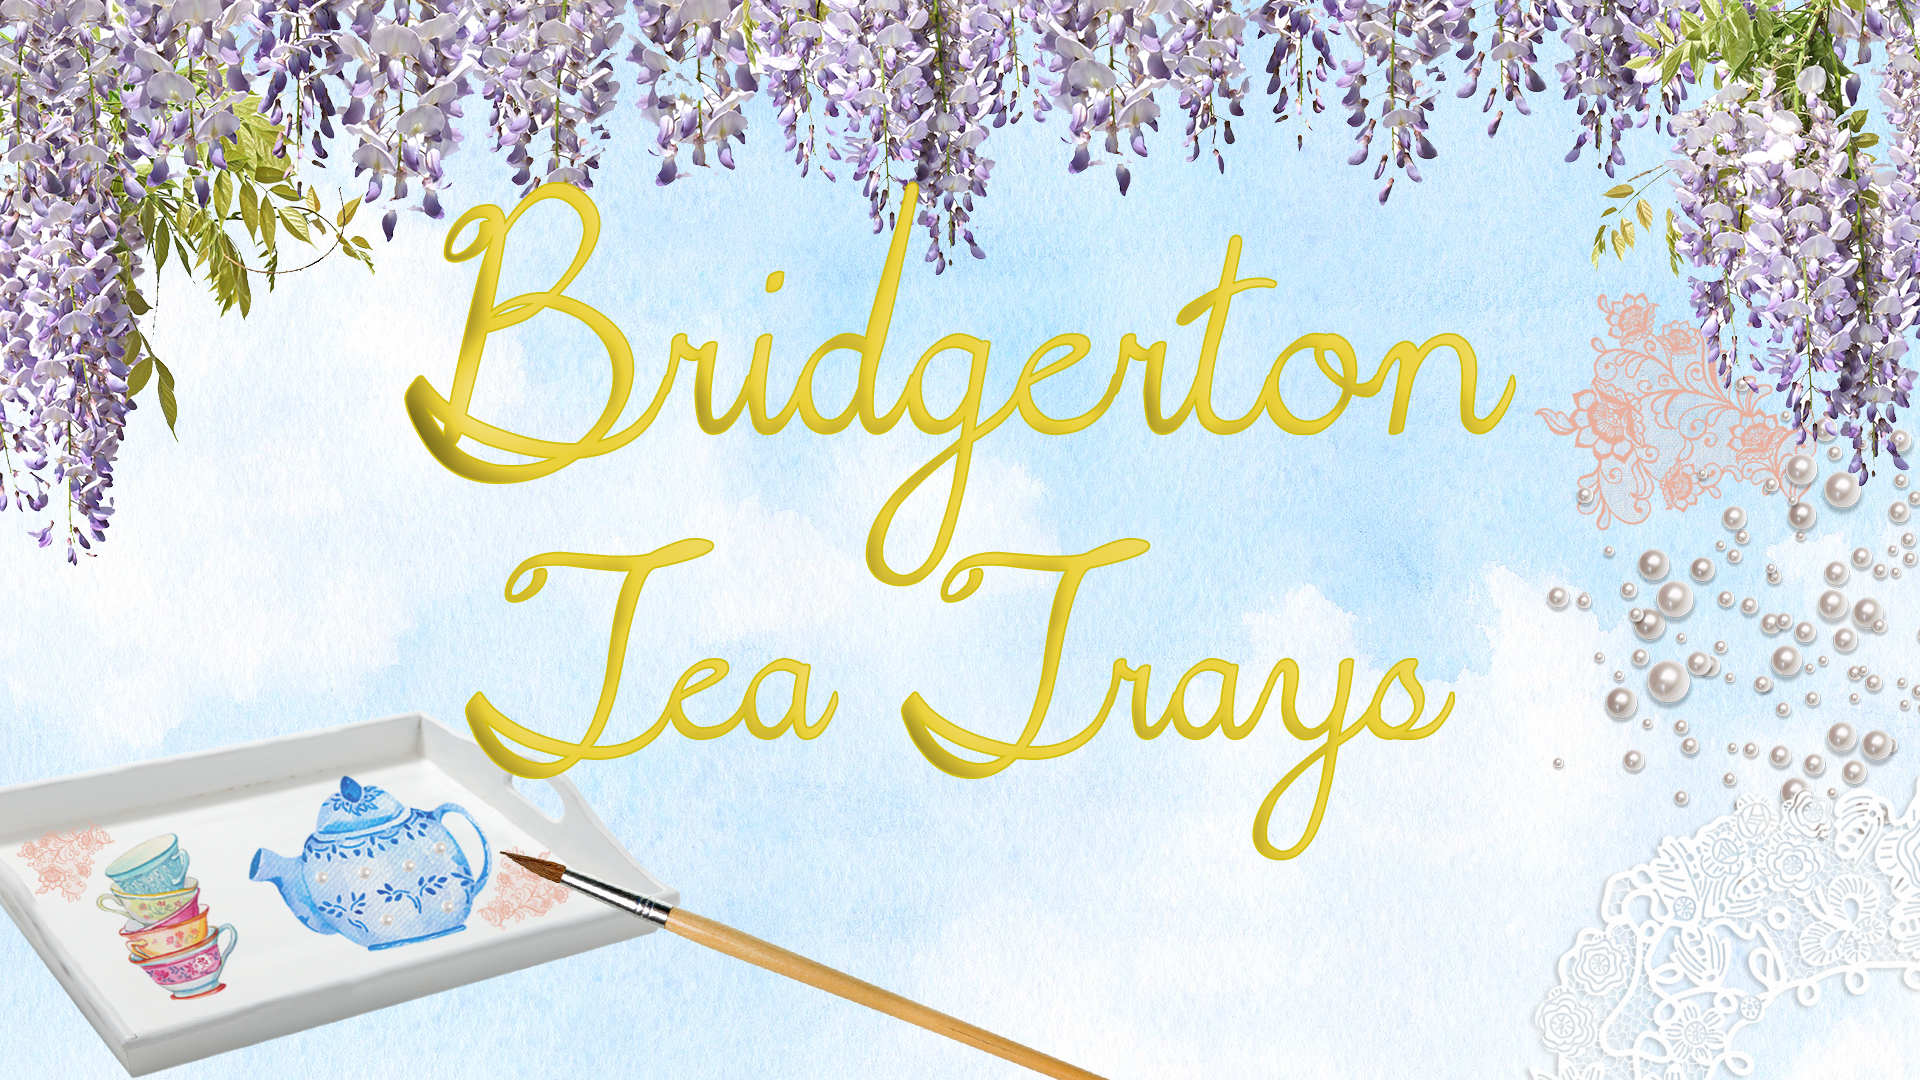 Image reads "Bridgerton Tea Trays" against a watercolor sky background and wisteria flowers hanging from the top of the image. A painted tea tray is to the bottom left of the title with a paintbrush. To the right of the title is a pile of pearls and small pieces of lace.